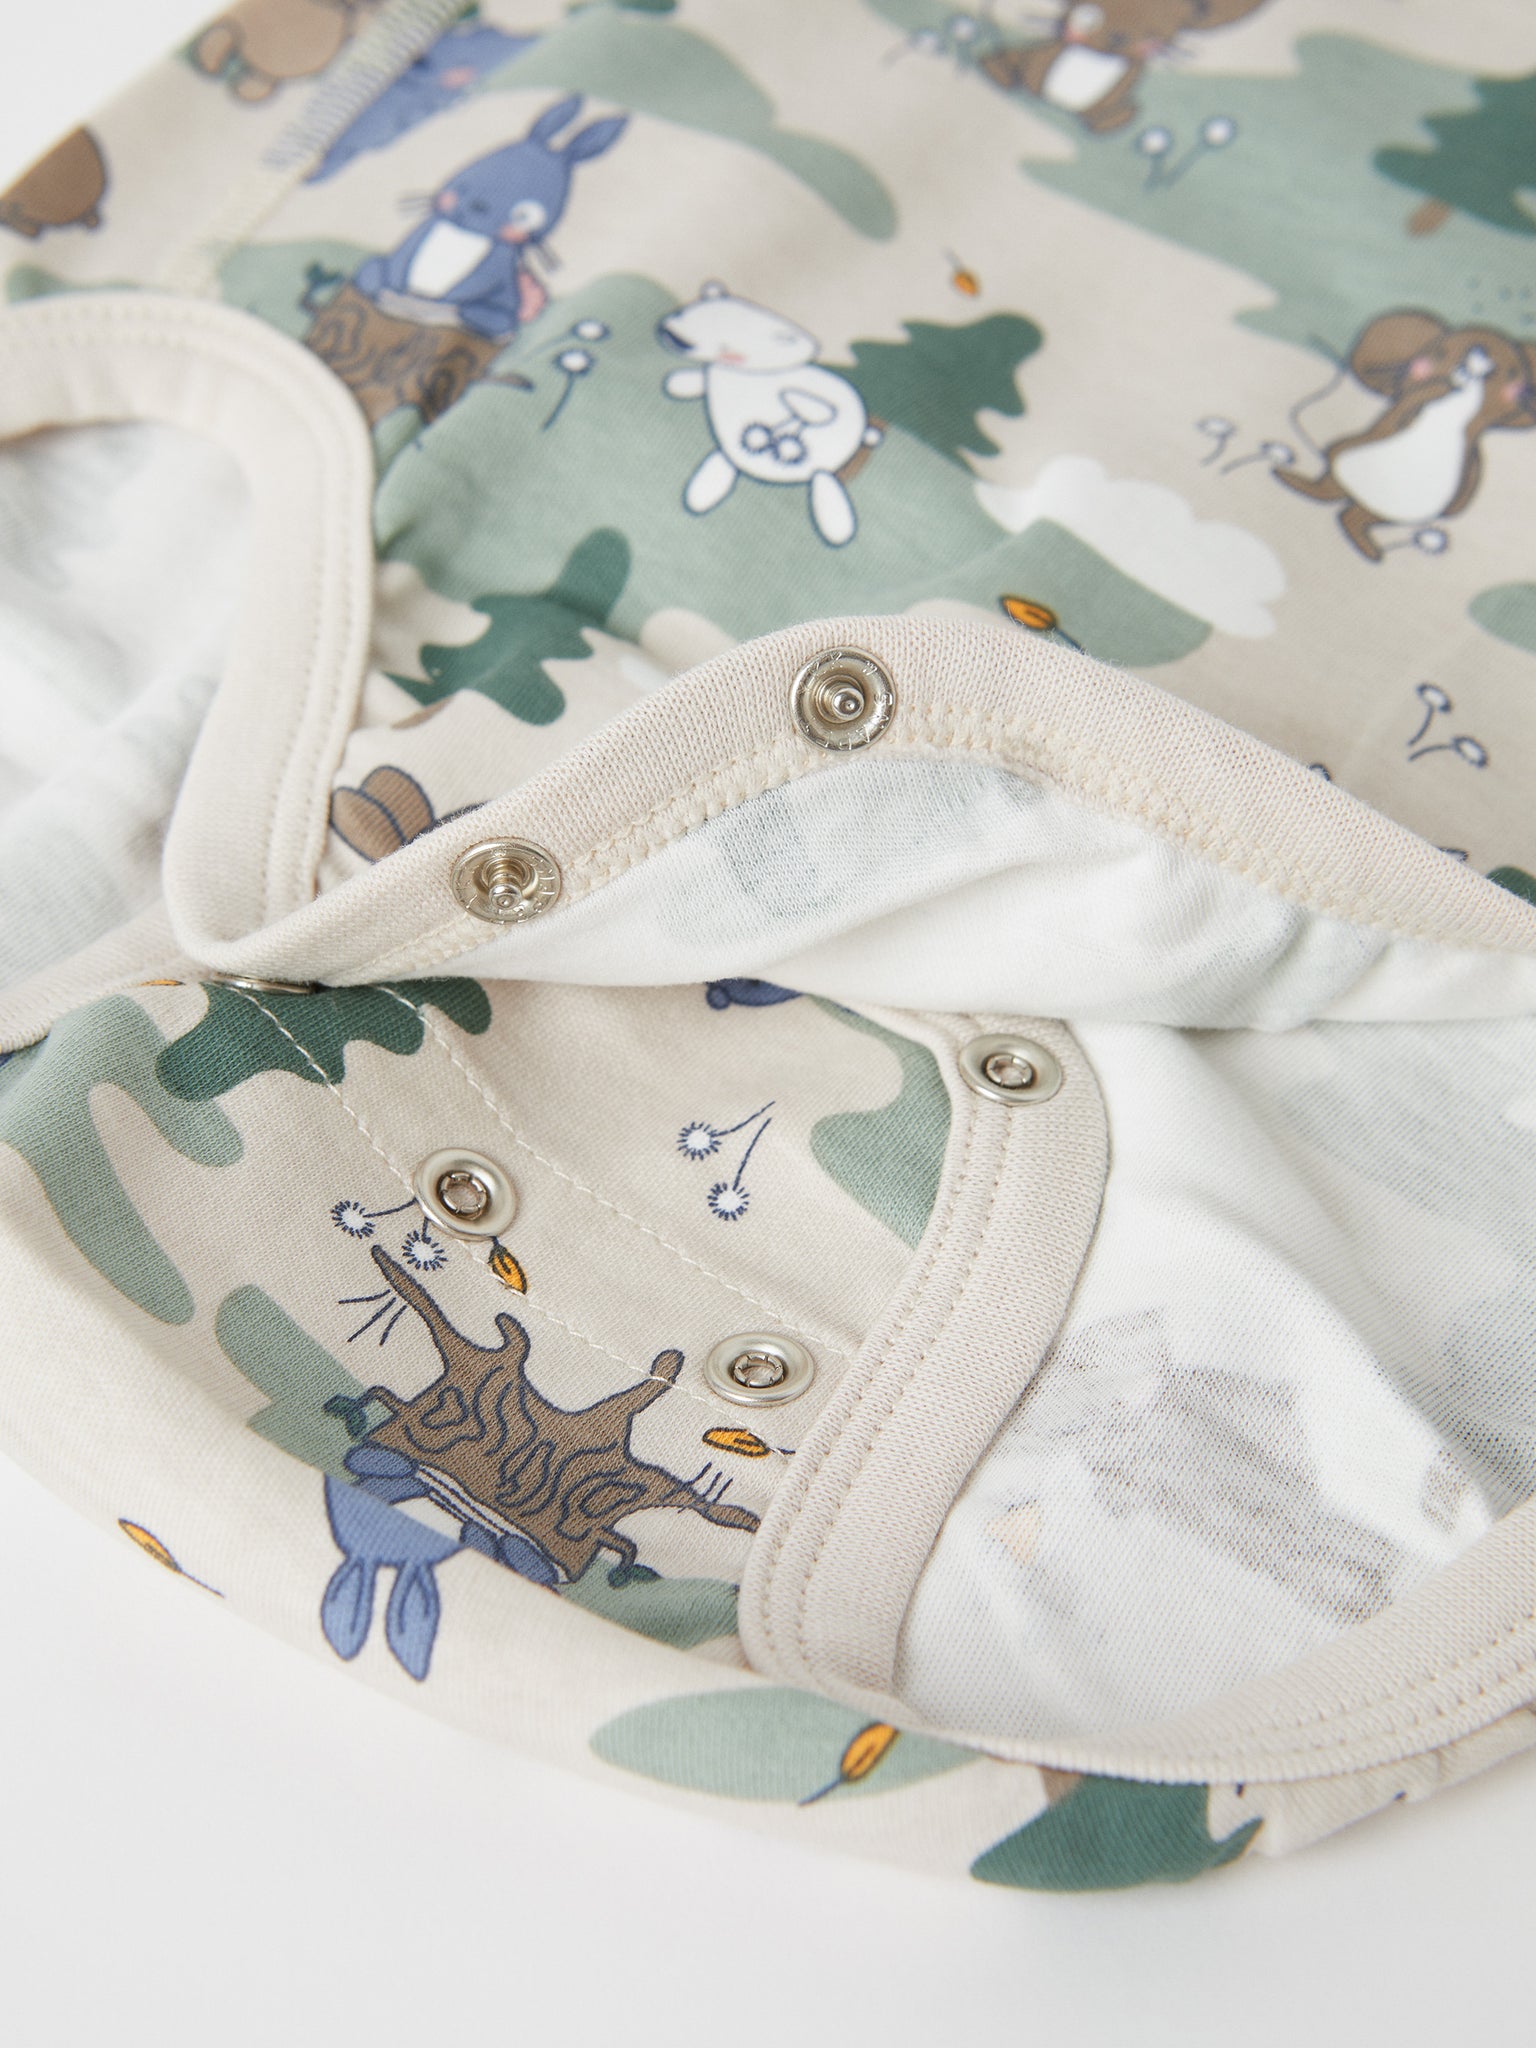 Forest Print Organic Cotton Babygrow from the Polarn O. Pyret baby collection. Clothes made using sustainably sourced materials.